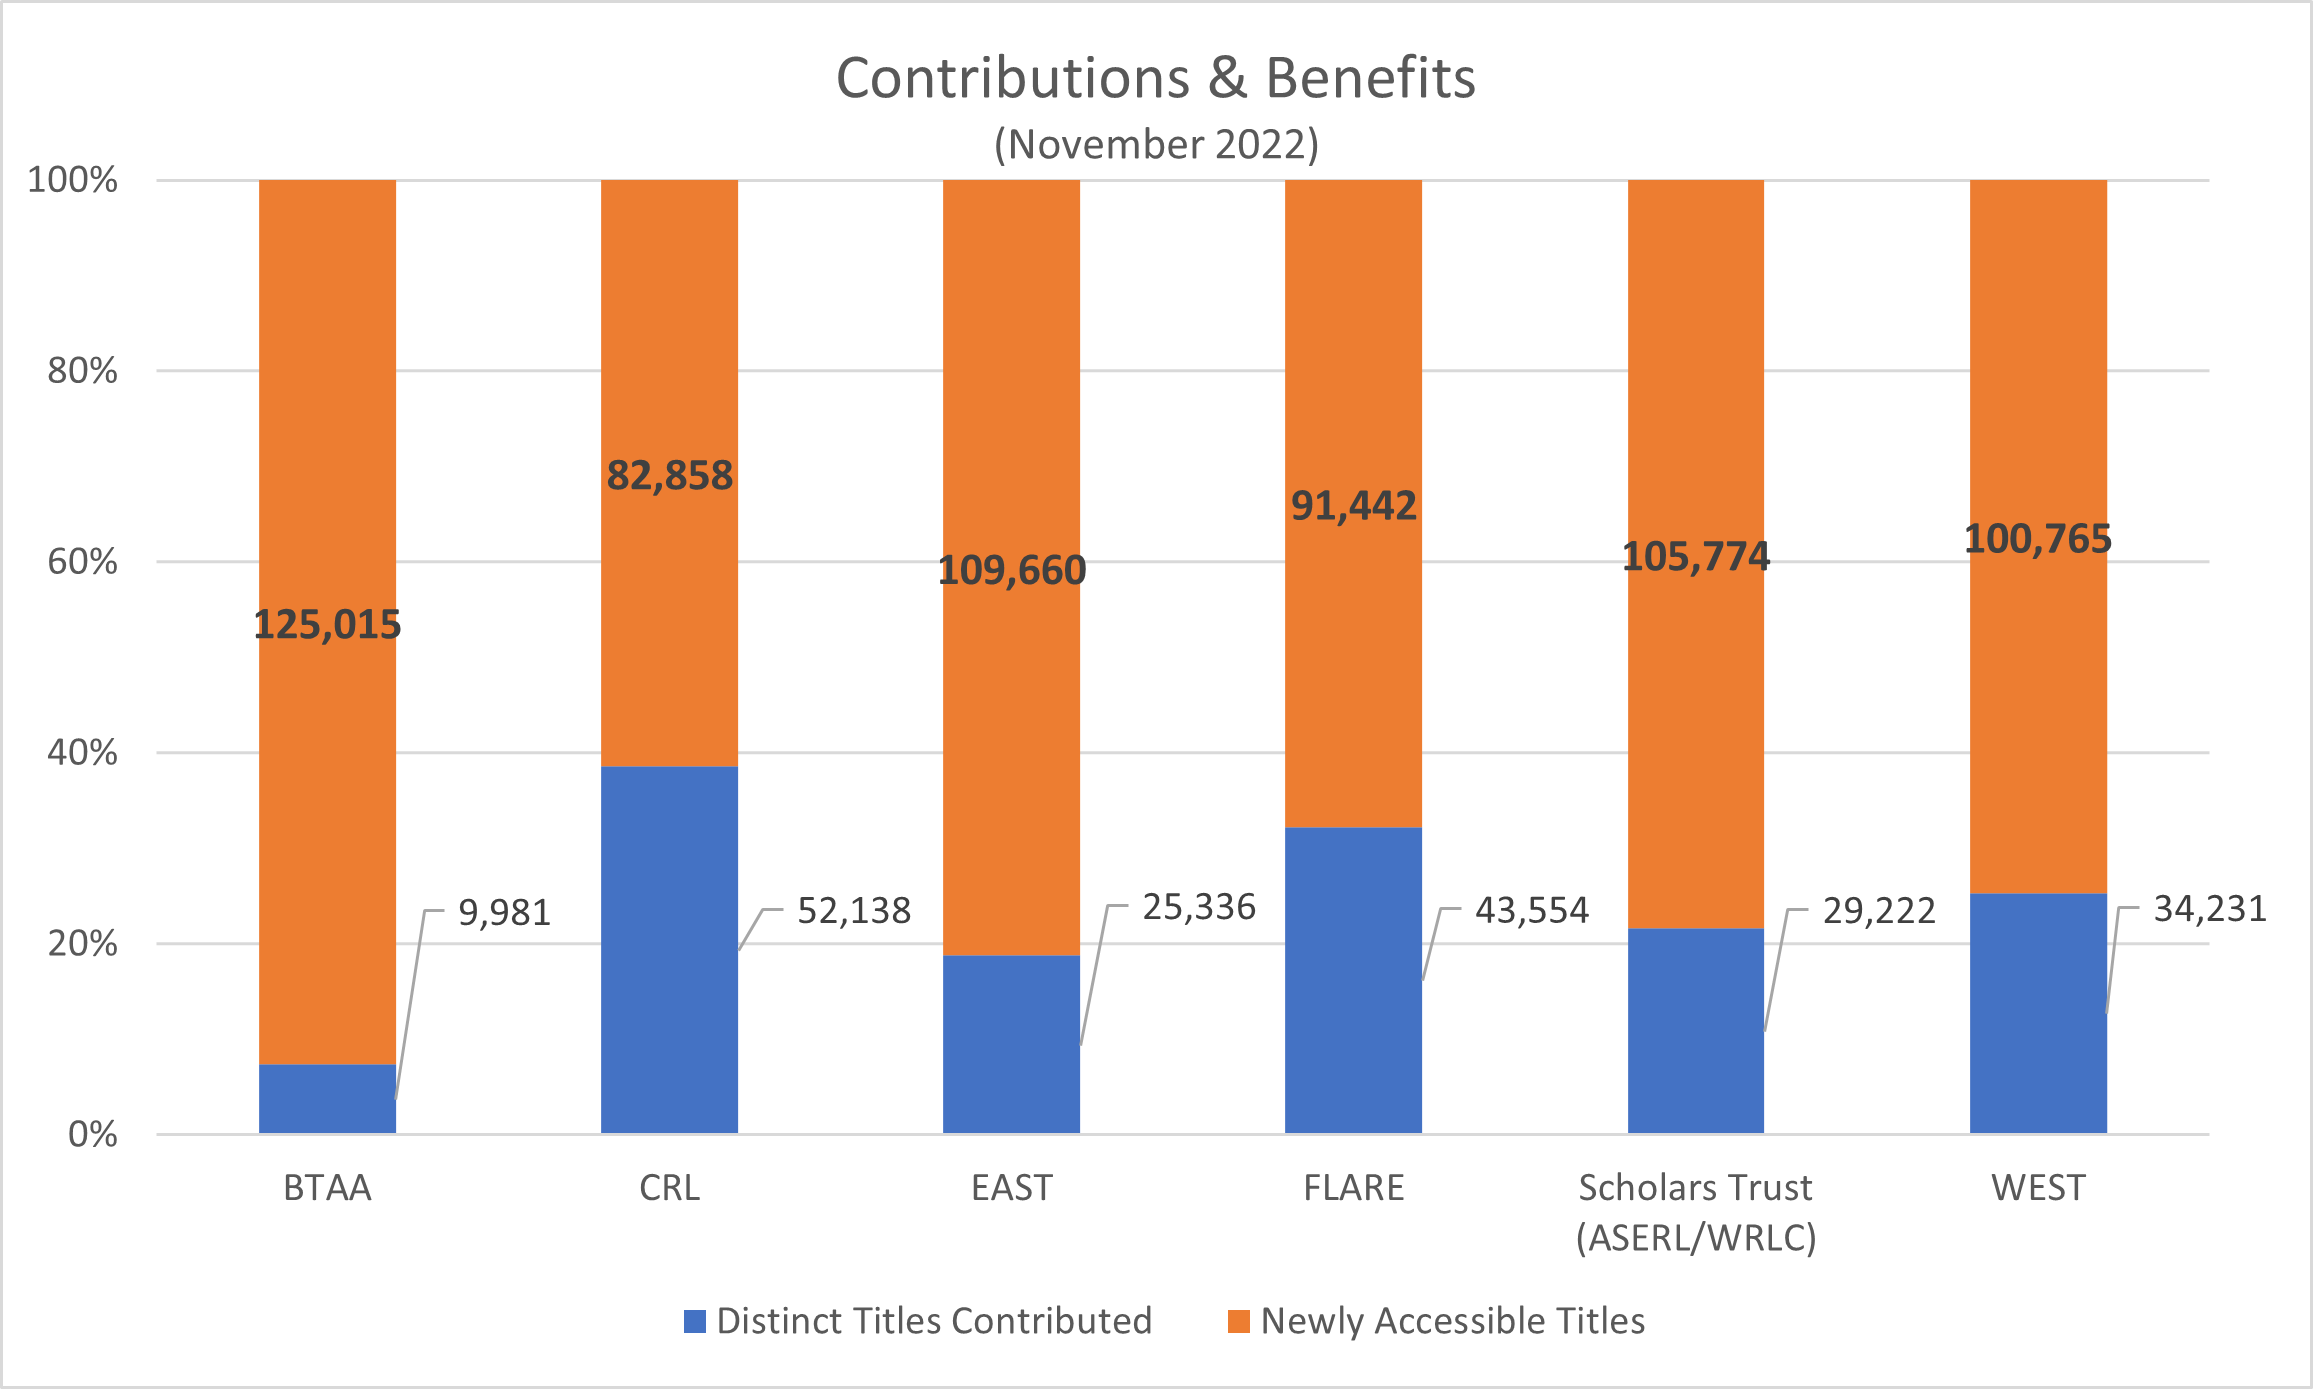 Contributions and benefits (November 2022): BTAA  9,981 titles contributed, 125,015 titles newly accessible; CRL 52,138 titles contributed, 82,858 titles newly accessible; EAST 25,336 titles contributed, 91,442 titles newly accessible; FLARE 43,554 titles contributed, 91,442 titles newly accessible; Scholars Trust (ASERL/WRLC) 29,222 titles contributed, 105,774 titles newly accessible; WEST 34,231 titles contributed, 100,765 titles newly accessible